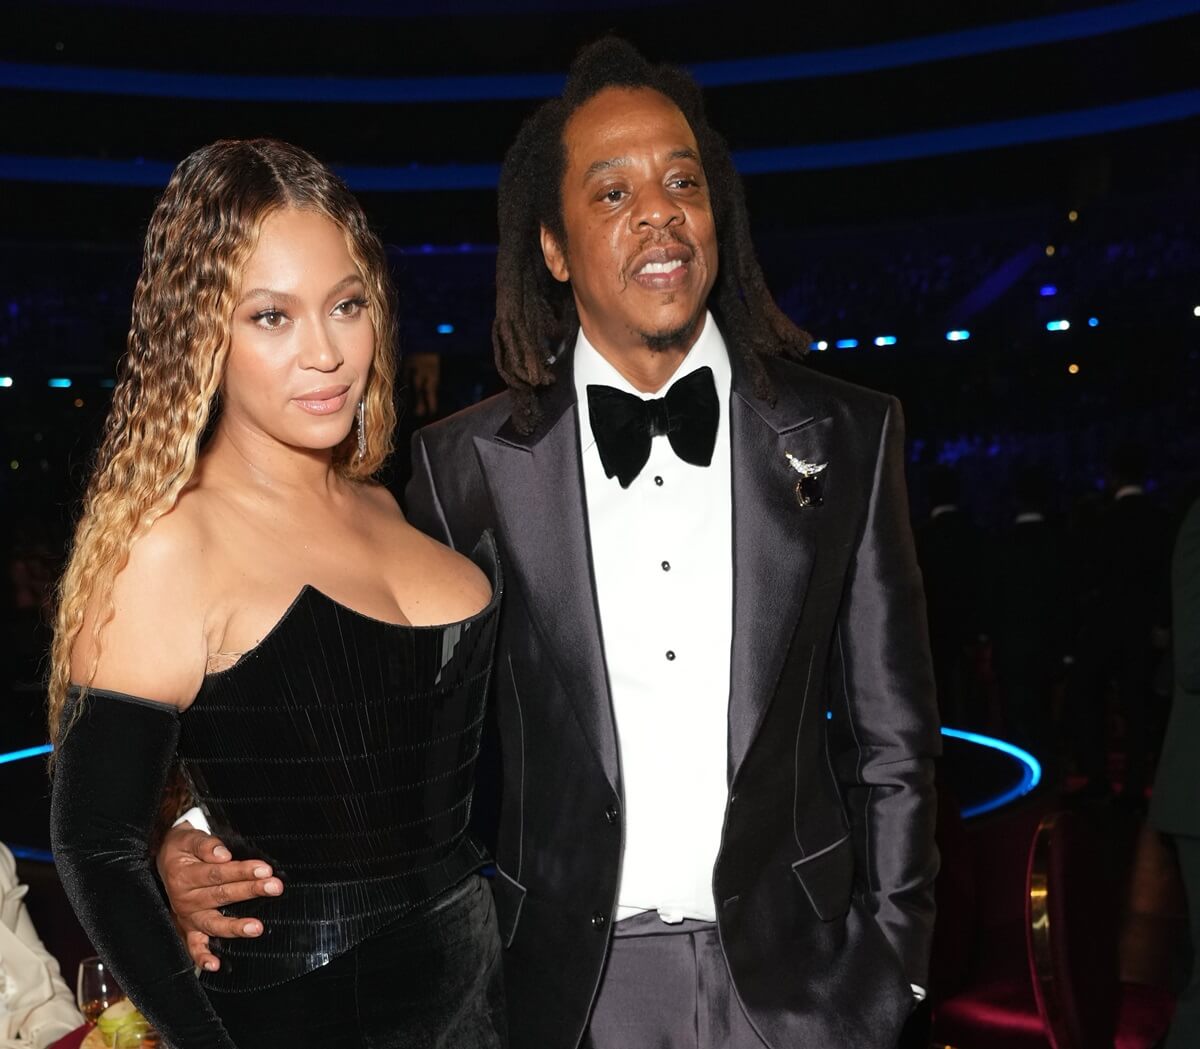 Beyoncé and Jay-Z pose for a photo together at the 65th GRAMMY Awards